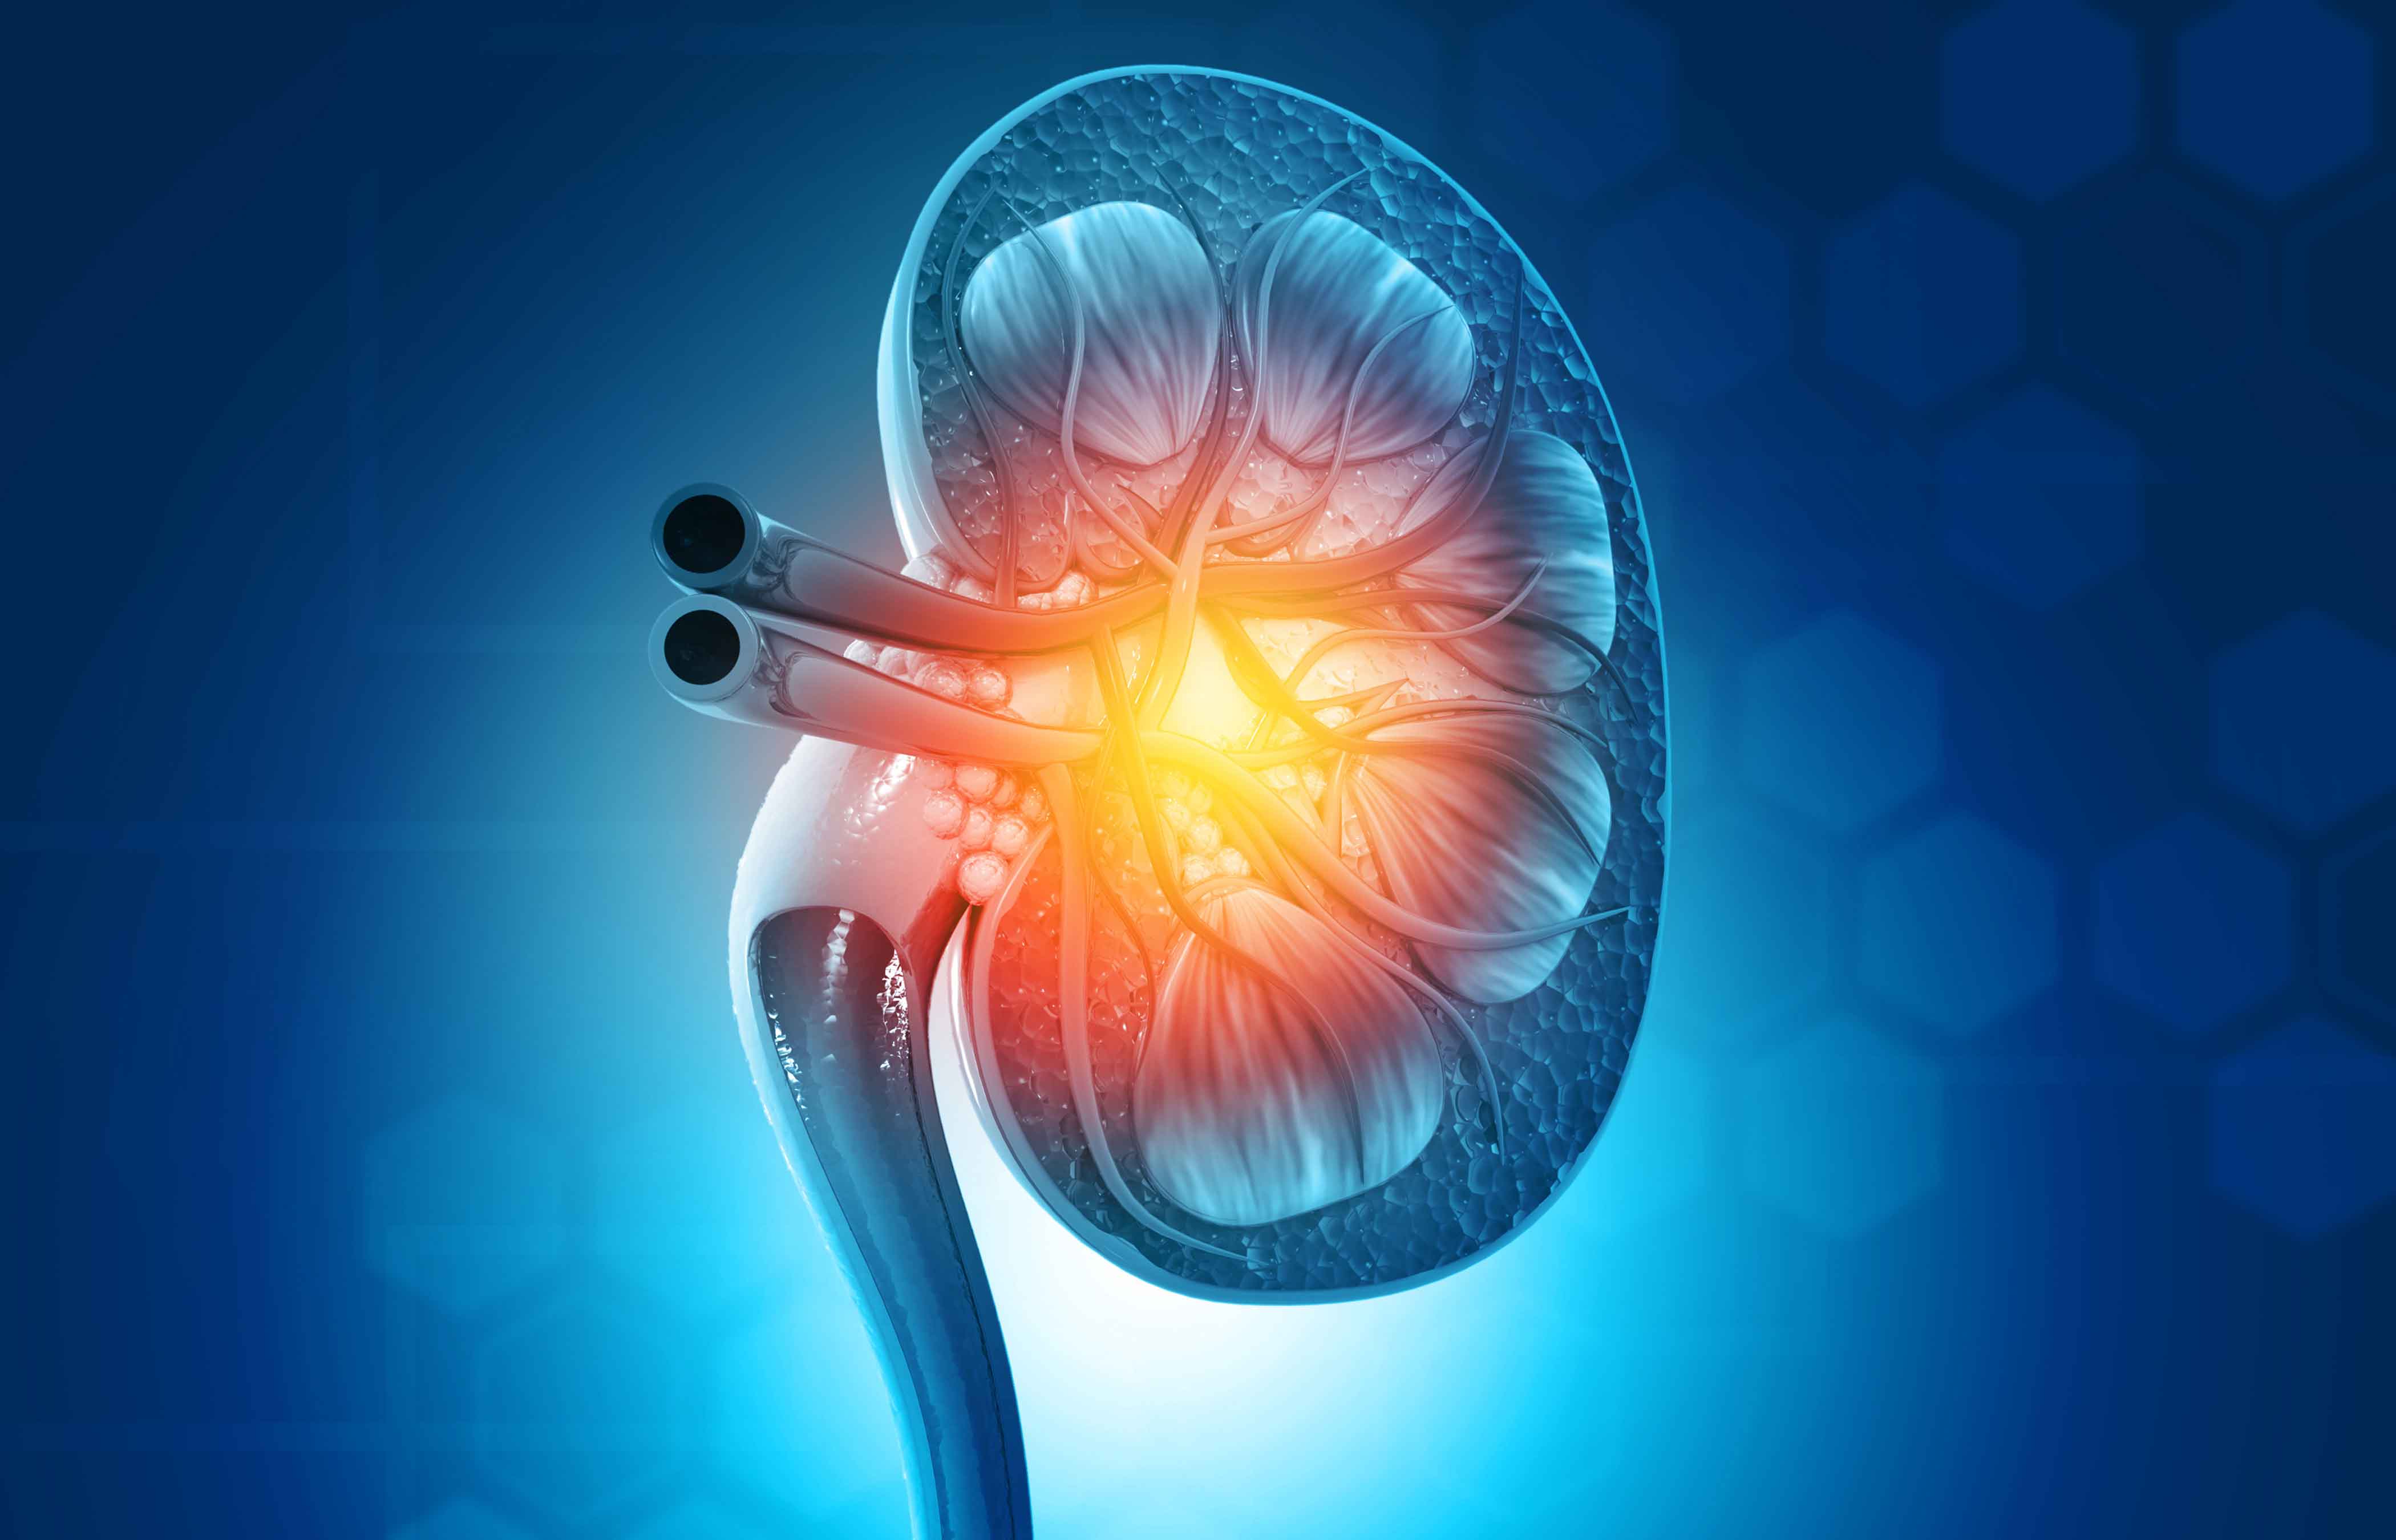 Human kidney cross section on blue, science background.